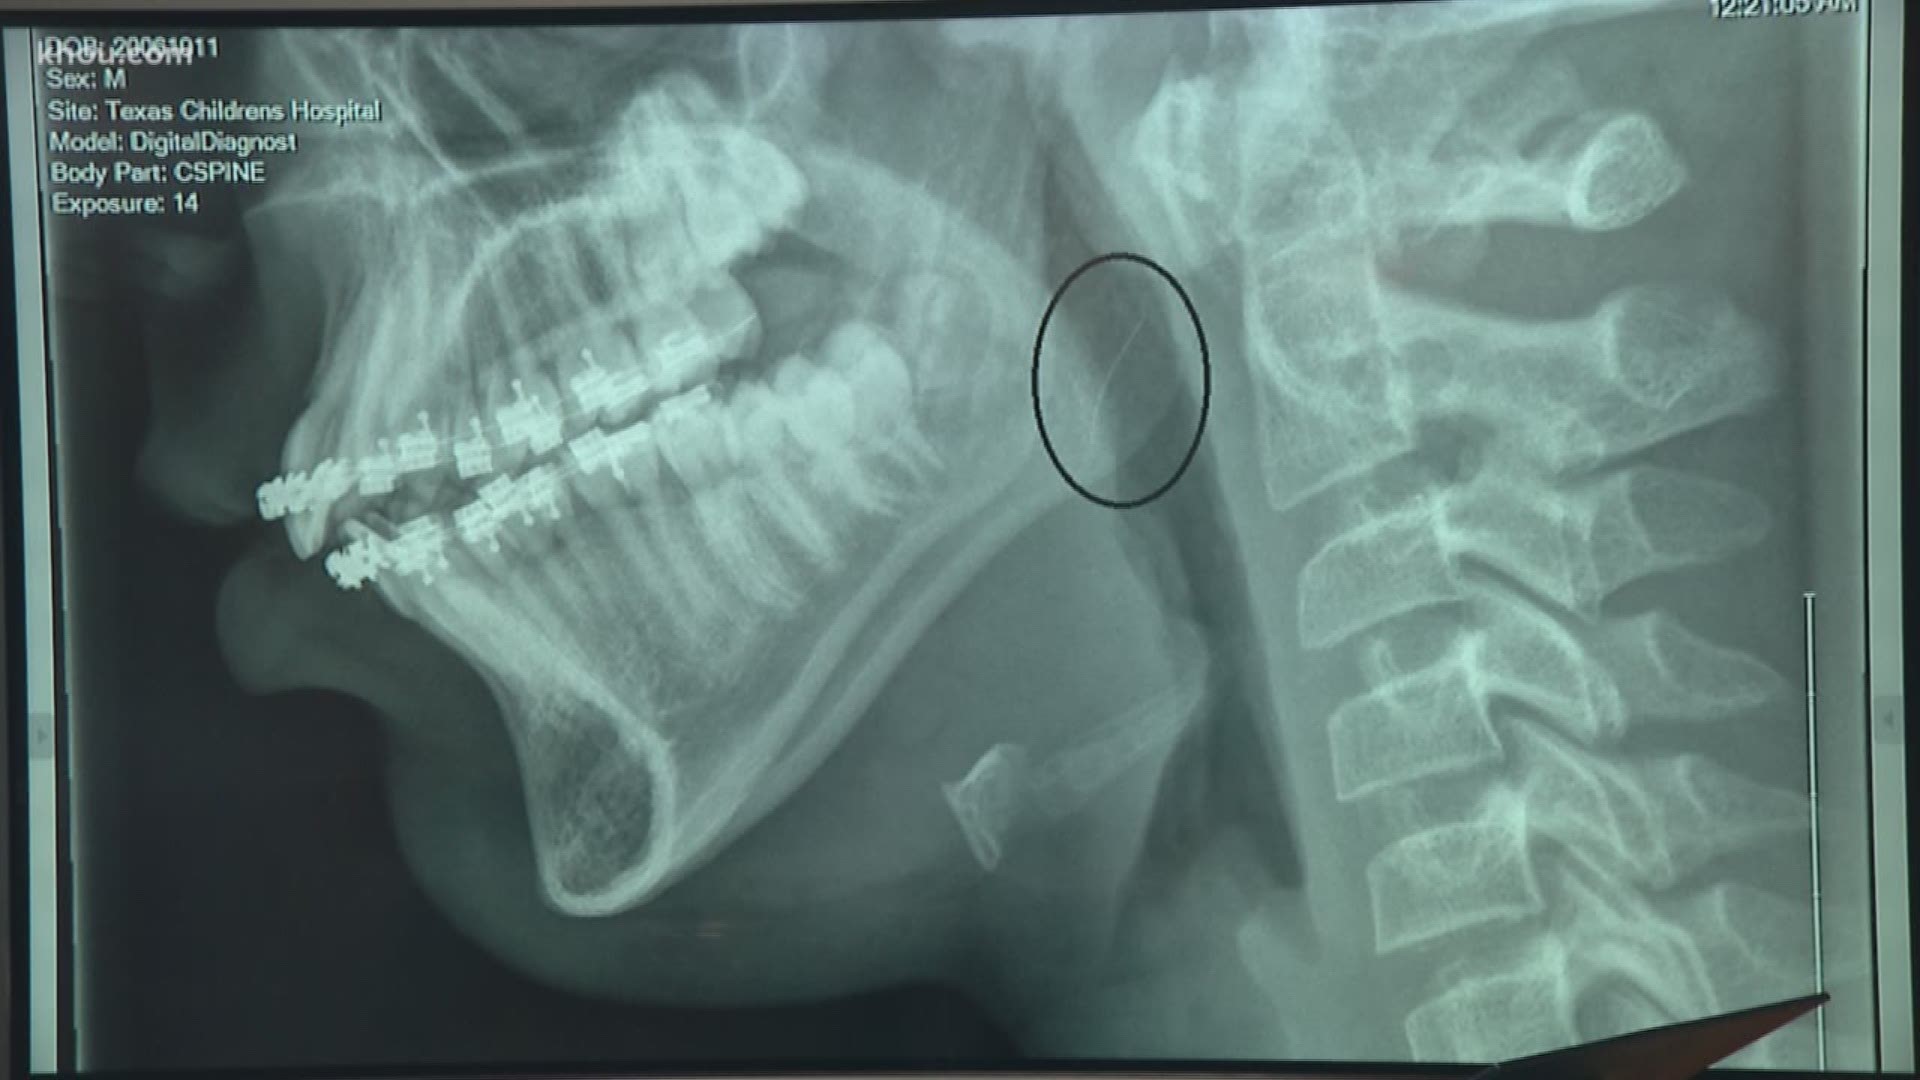 12-year-old boy swallows metal piece left from wire grill brush | khou.com